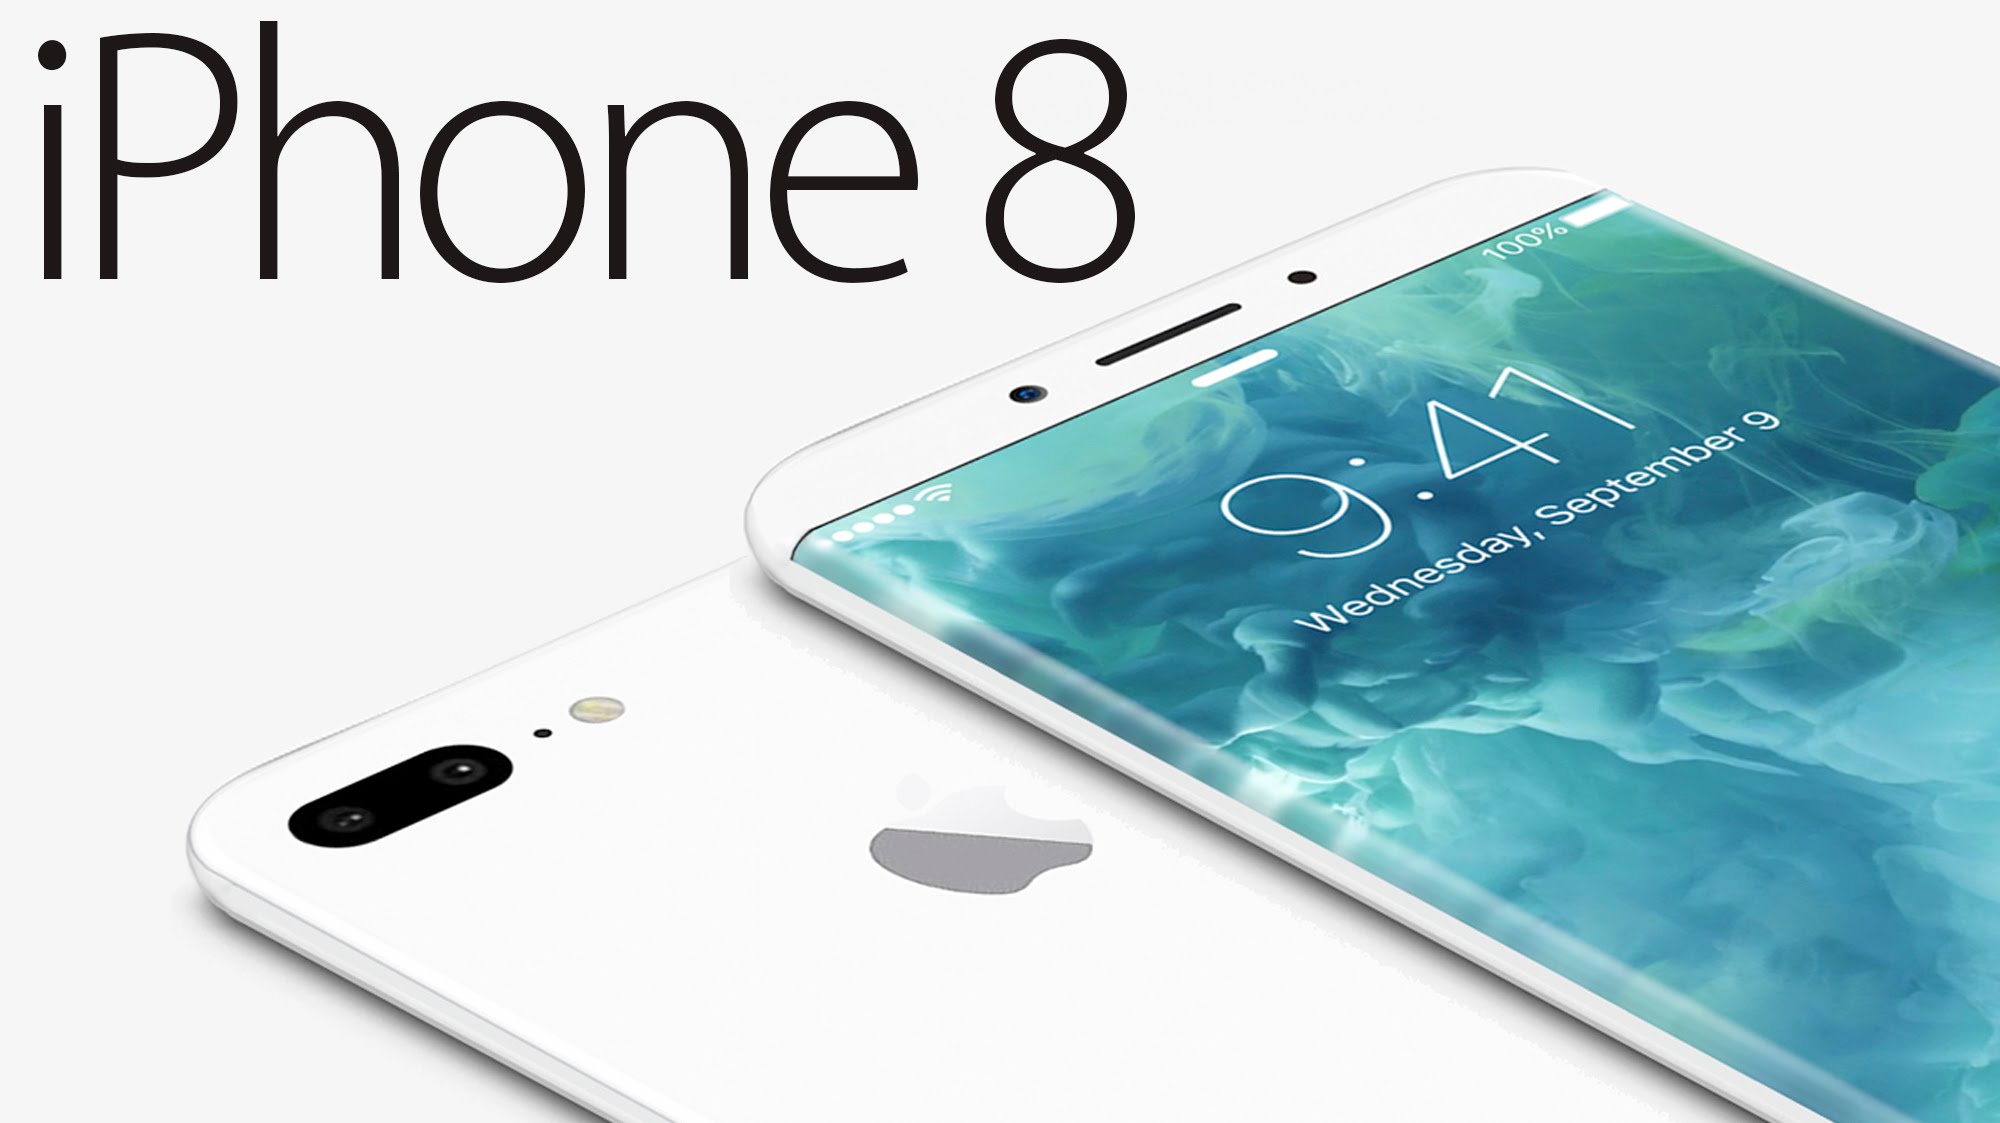 iPhone 8 back in the game, Tech news, Technology news, techie news, latest techno news,technology world,iPhone 8, apple iPhone 8, iPhone 8 brings apple back, mango news, international news, national news, iphone 8 plus release , digital news, apple technology